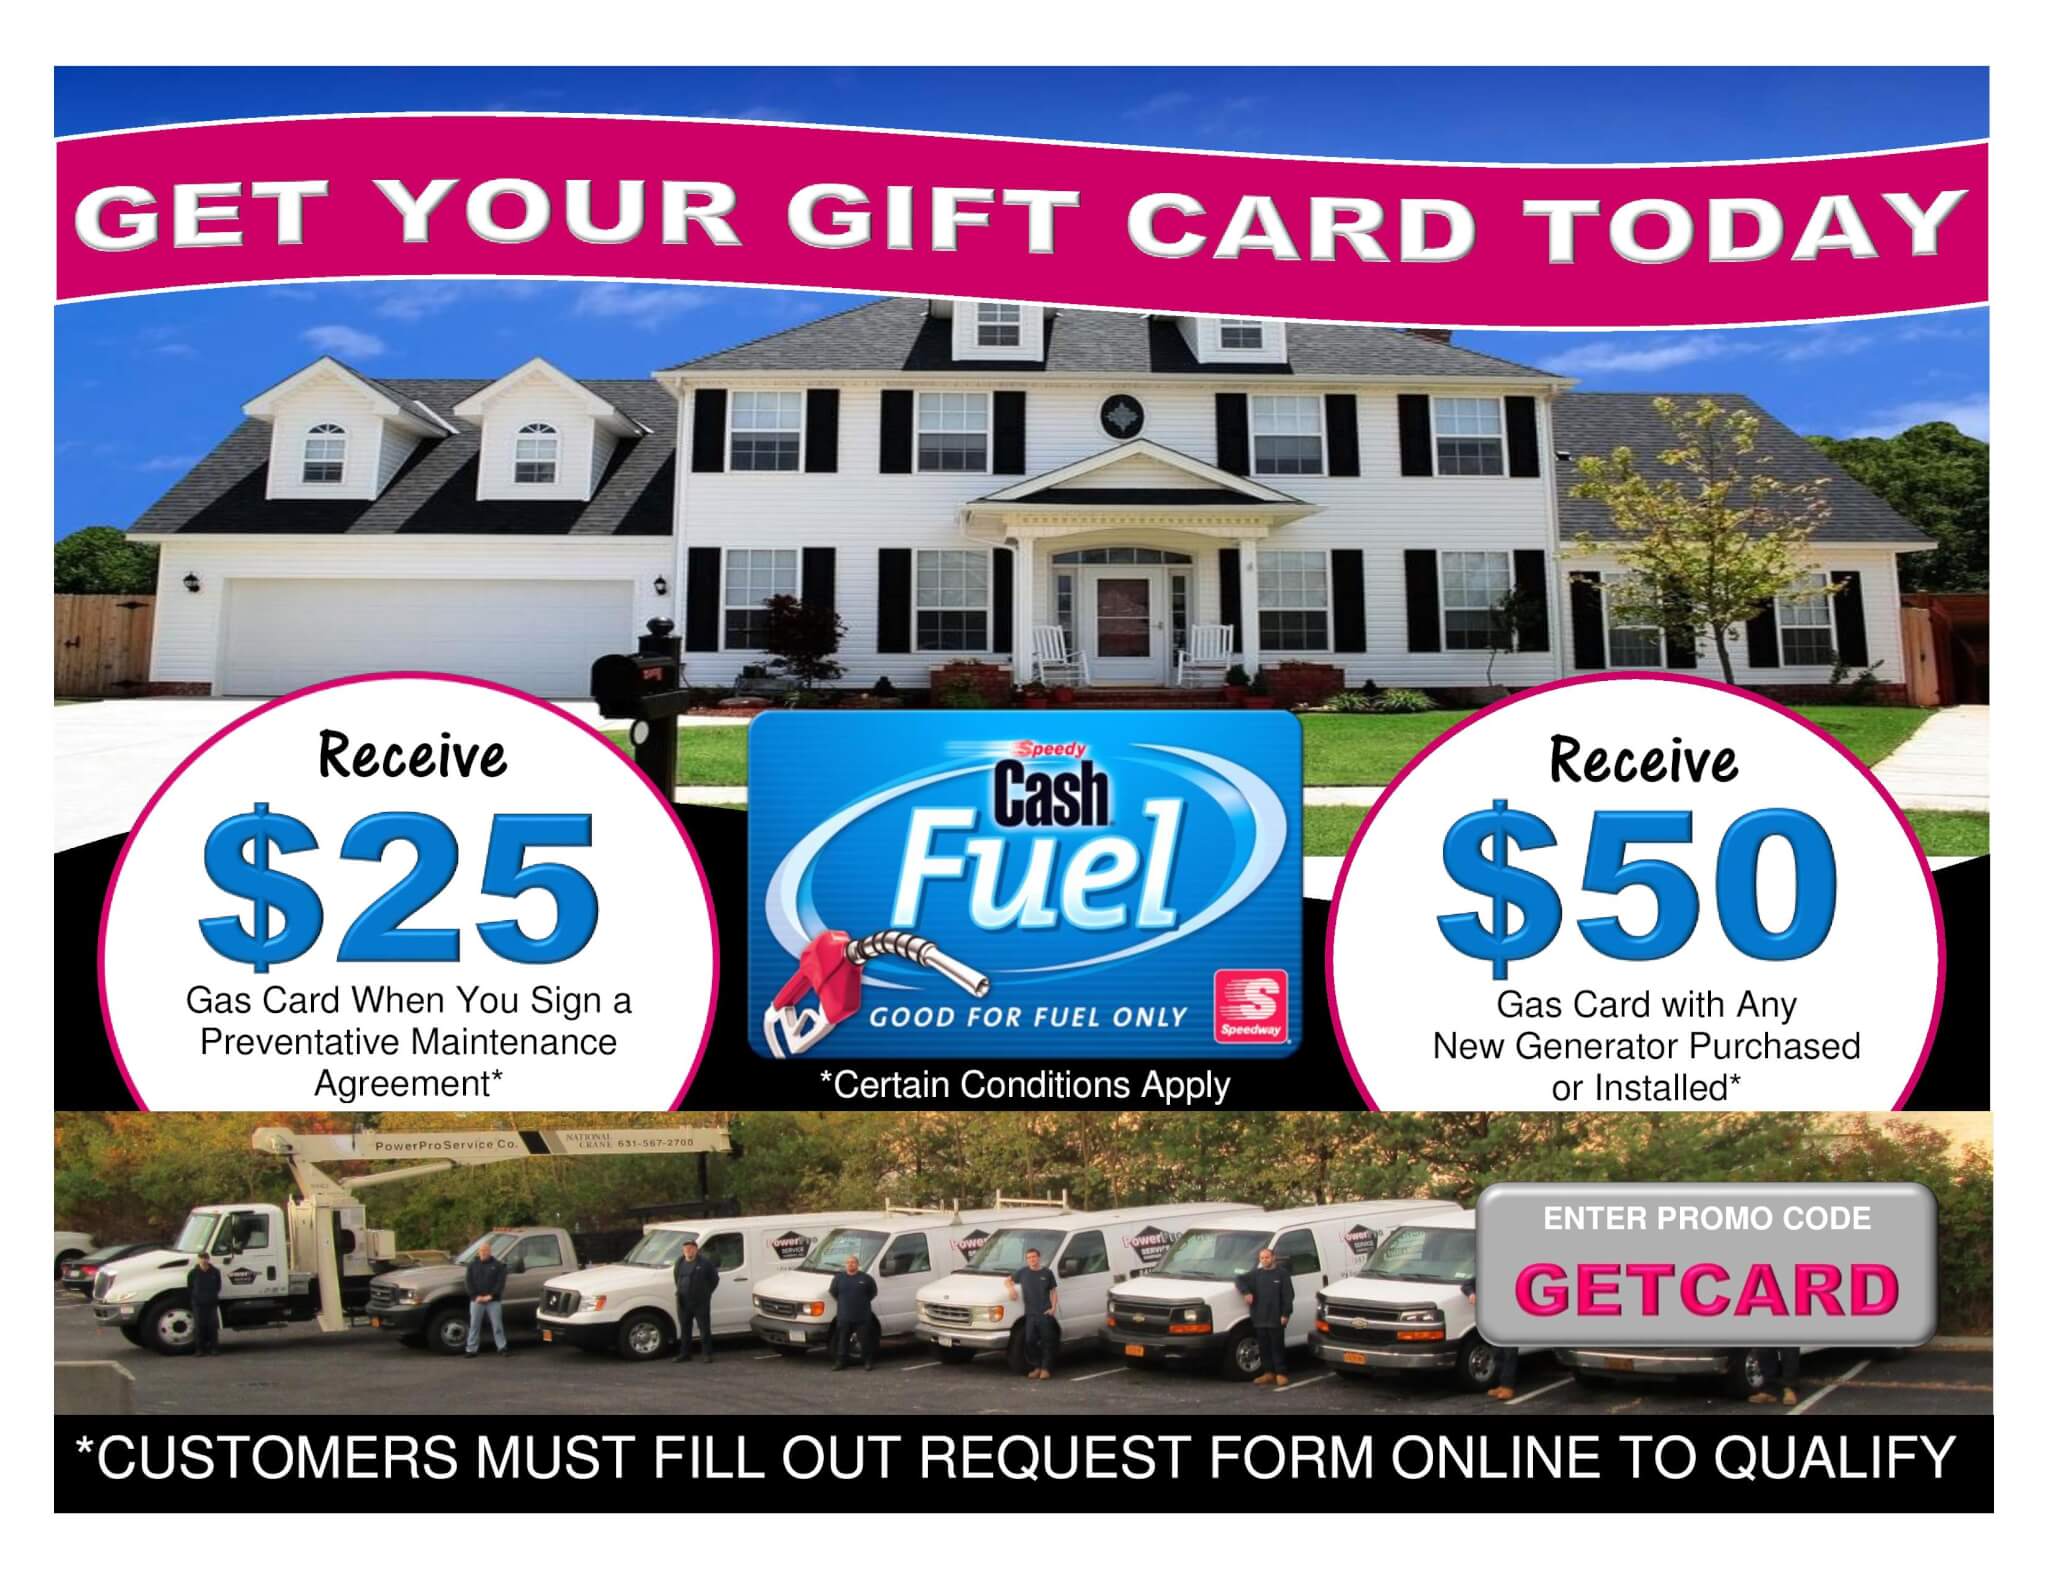 Get Your Gift Card NOW!